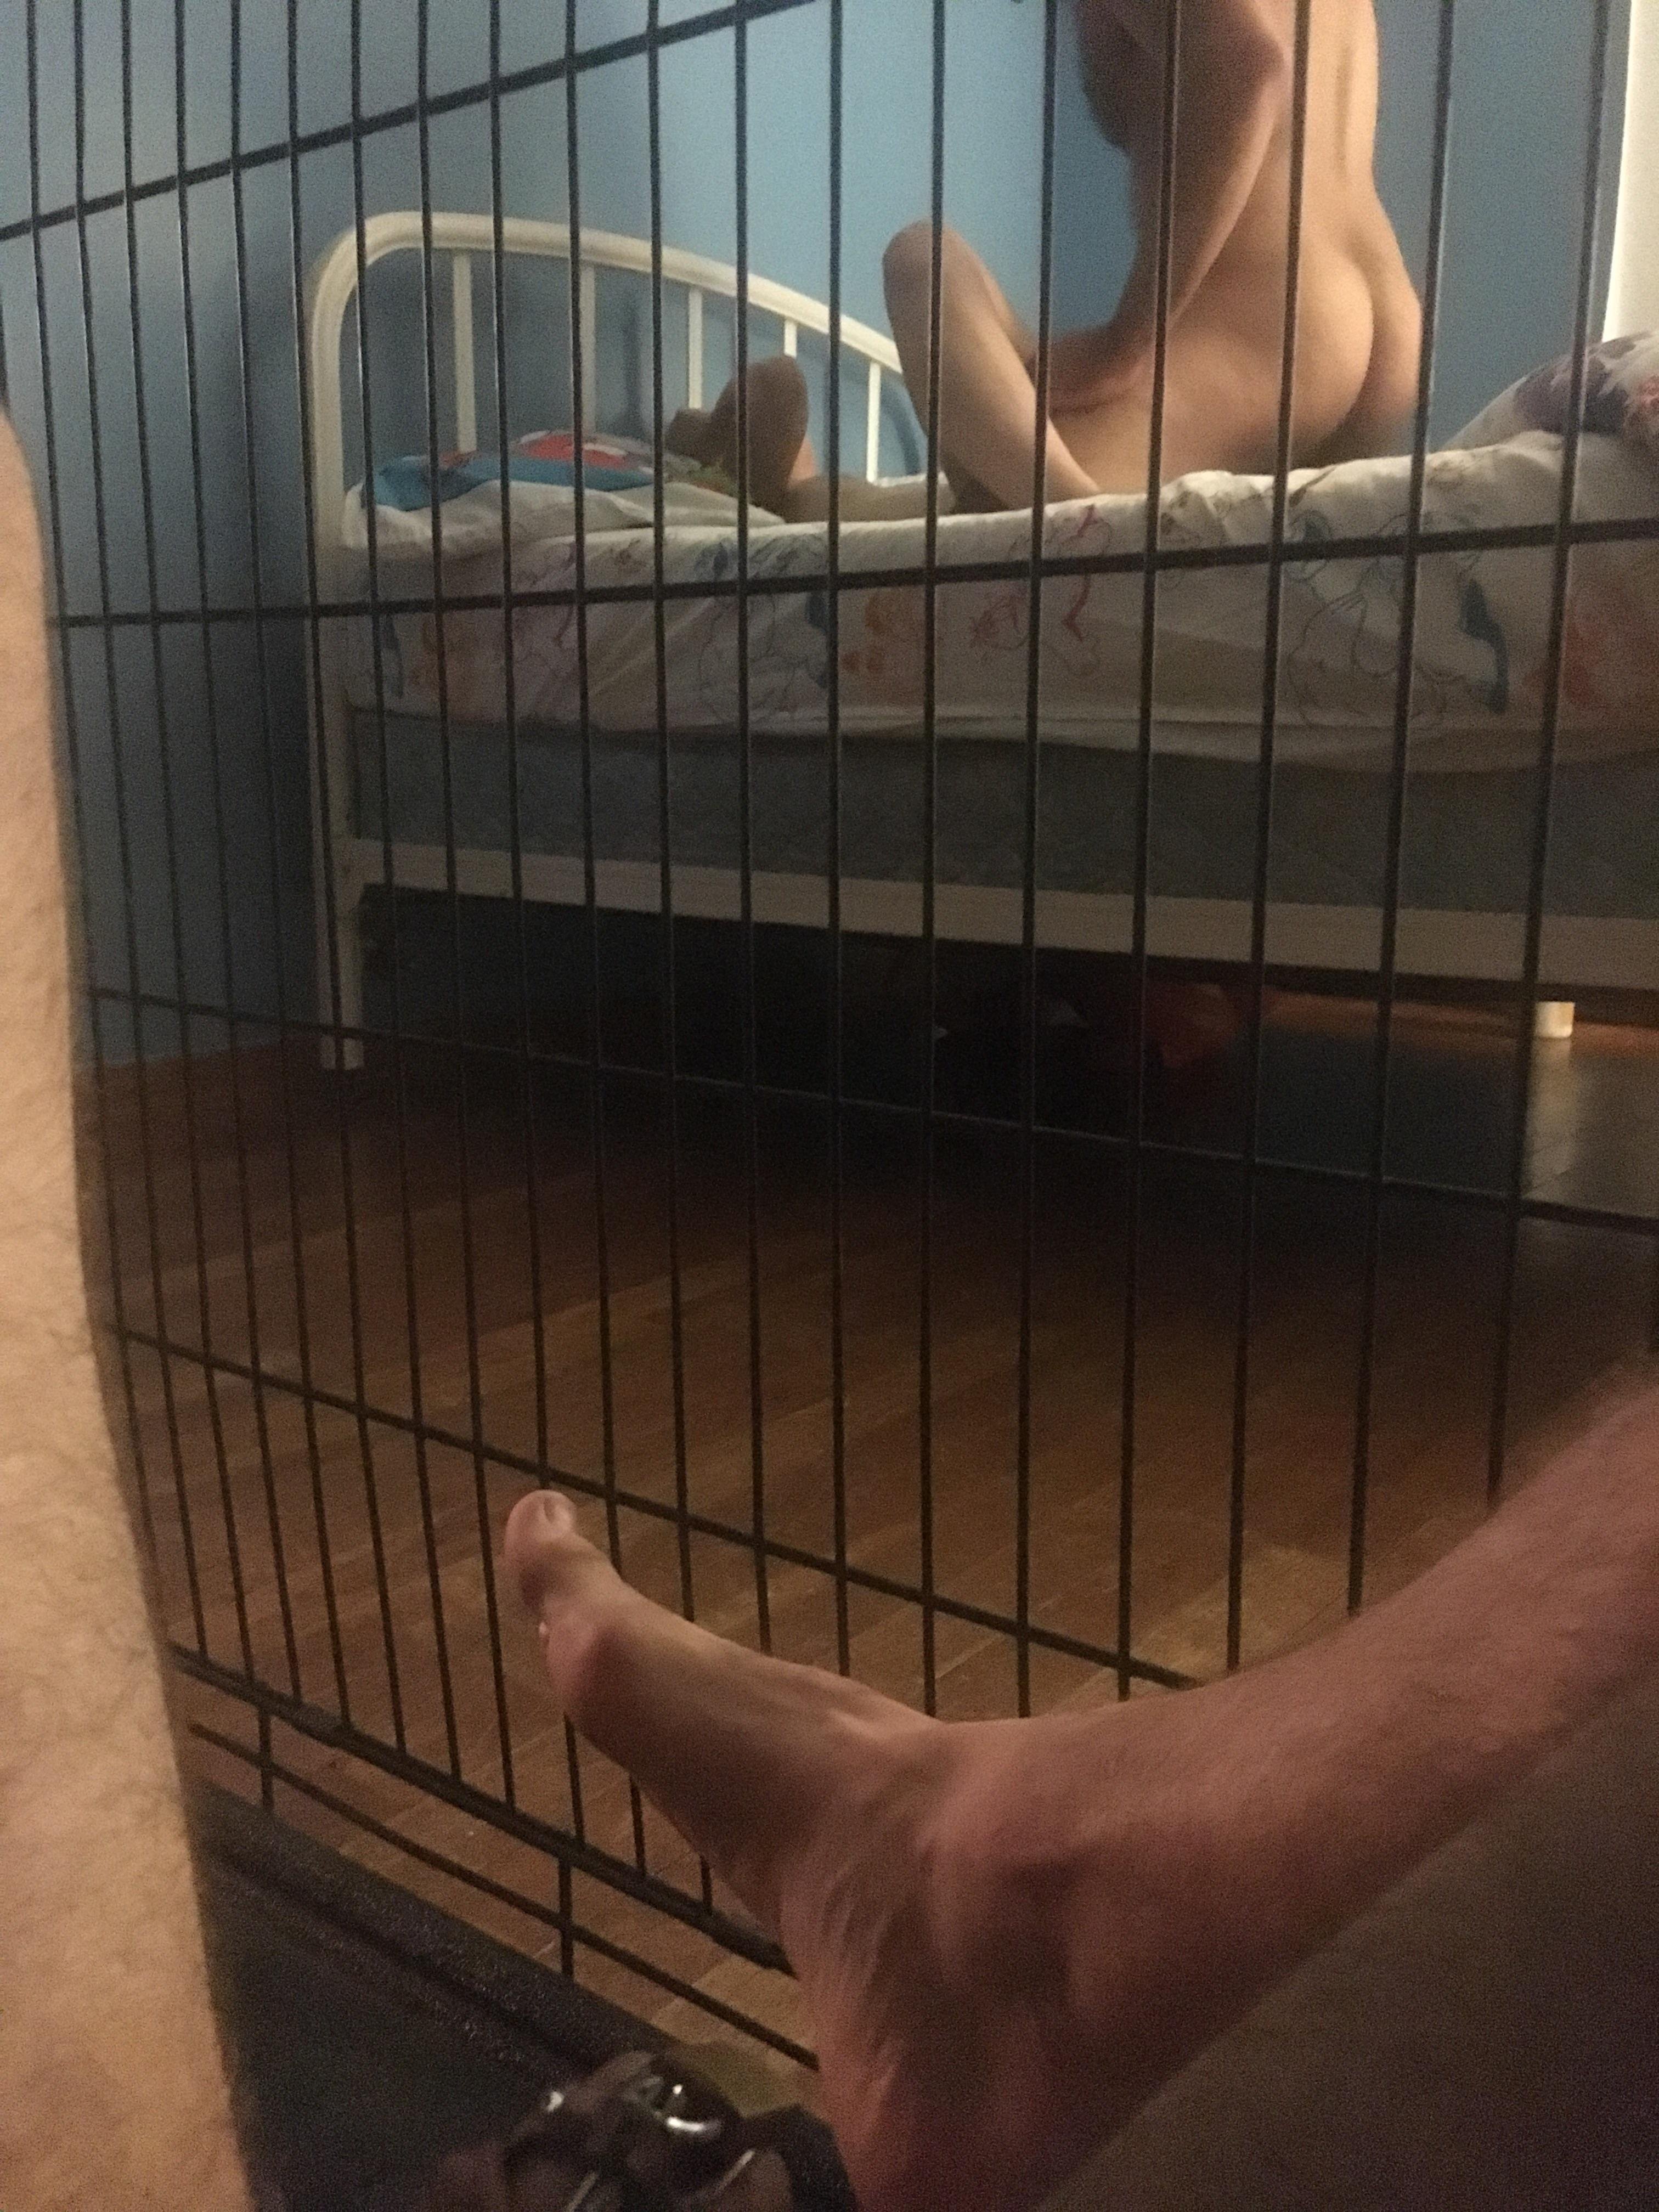 Caged in a cage sad little dick can’t get out